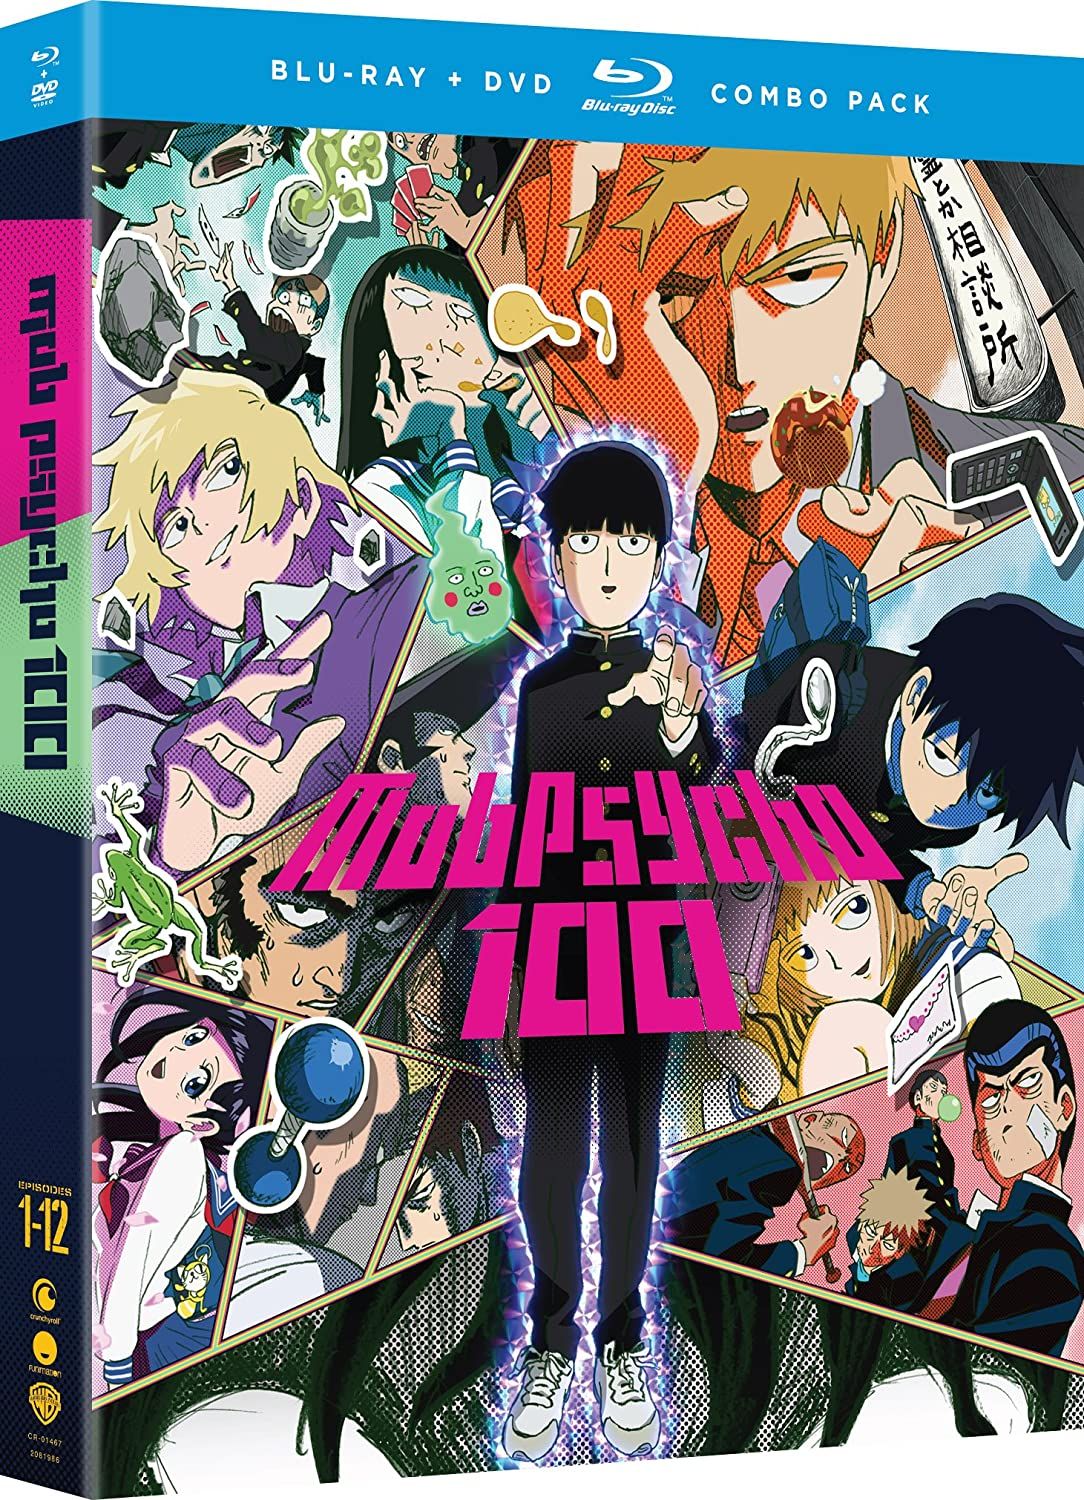 Shigeo Kageyama with the other main characters on the Mob Psycho 100 bluray case